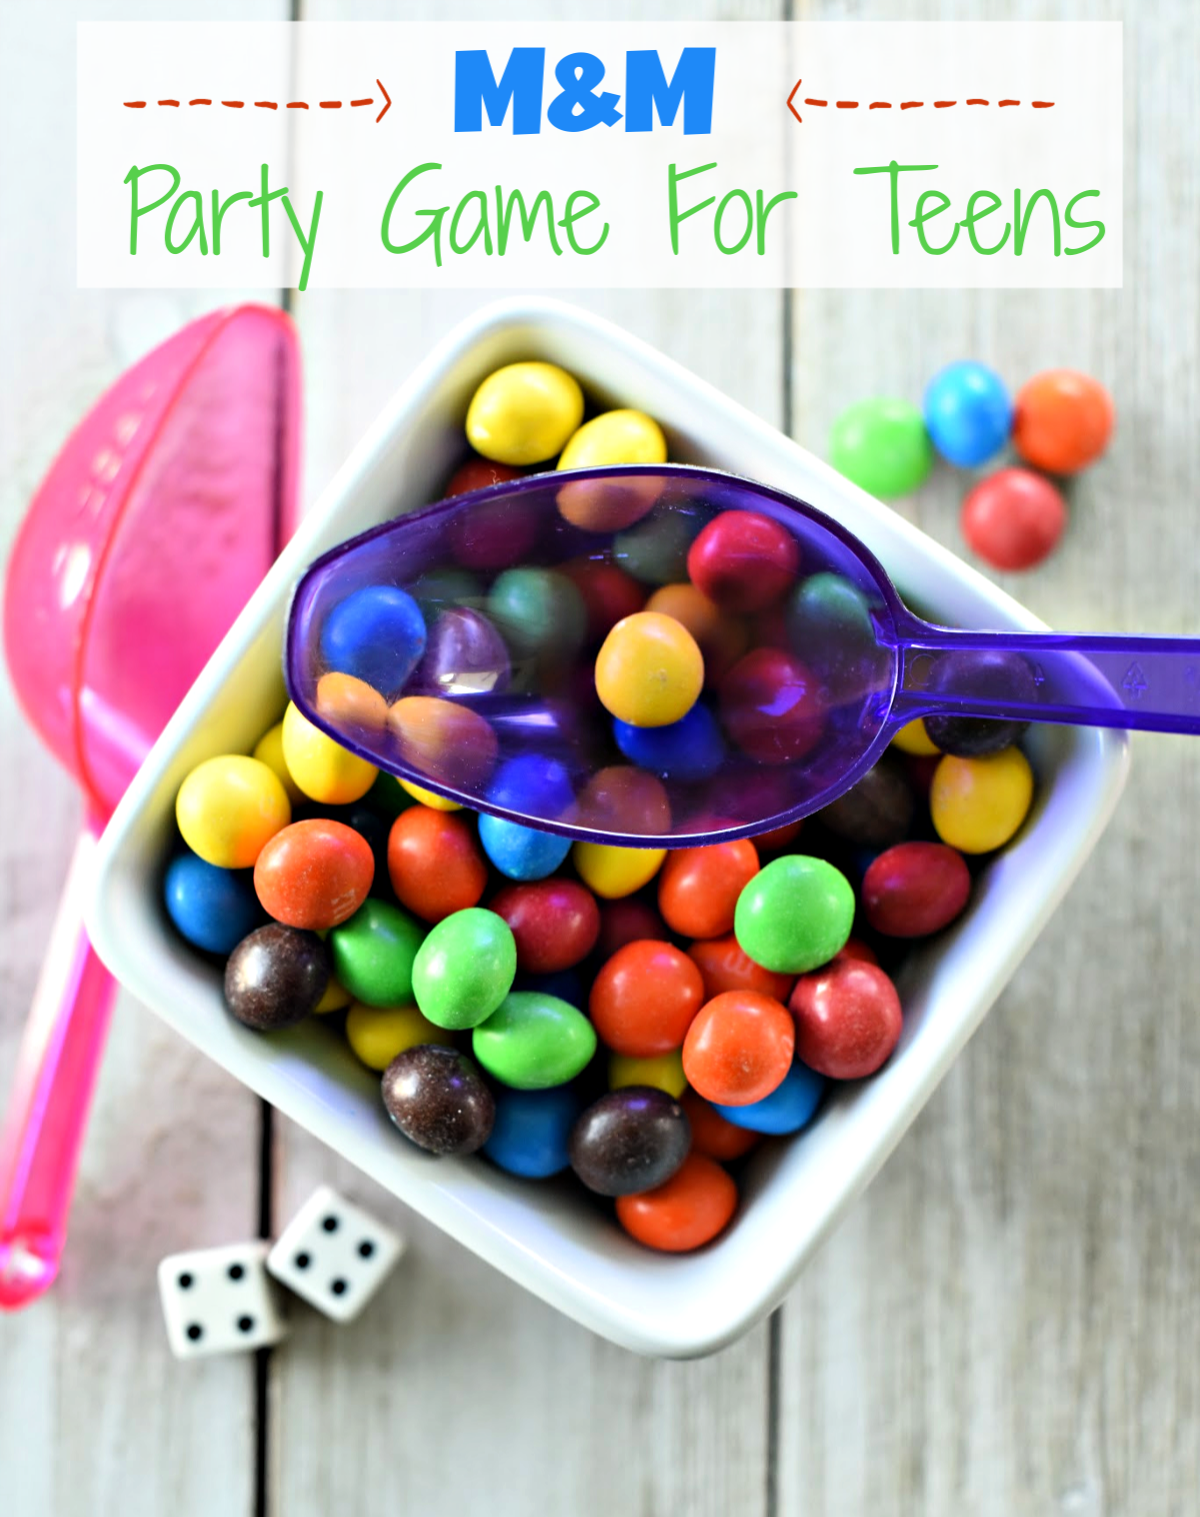 Party Game for Teens